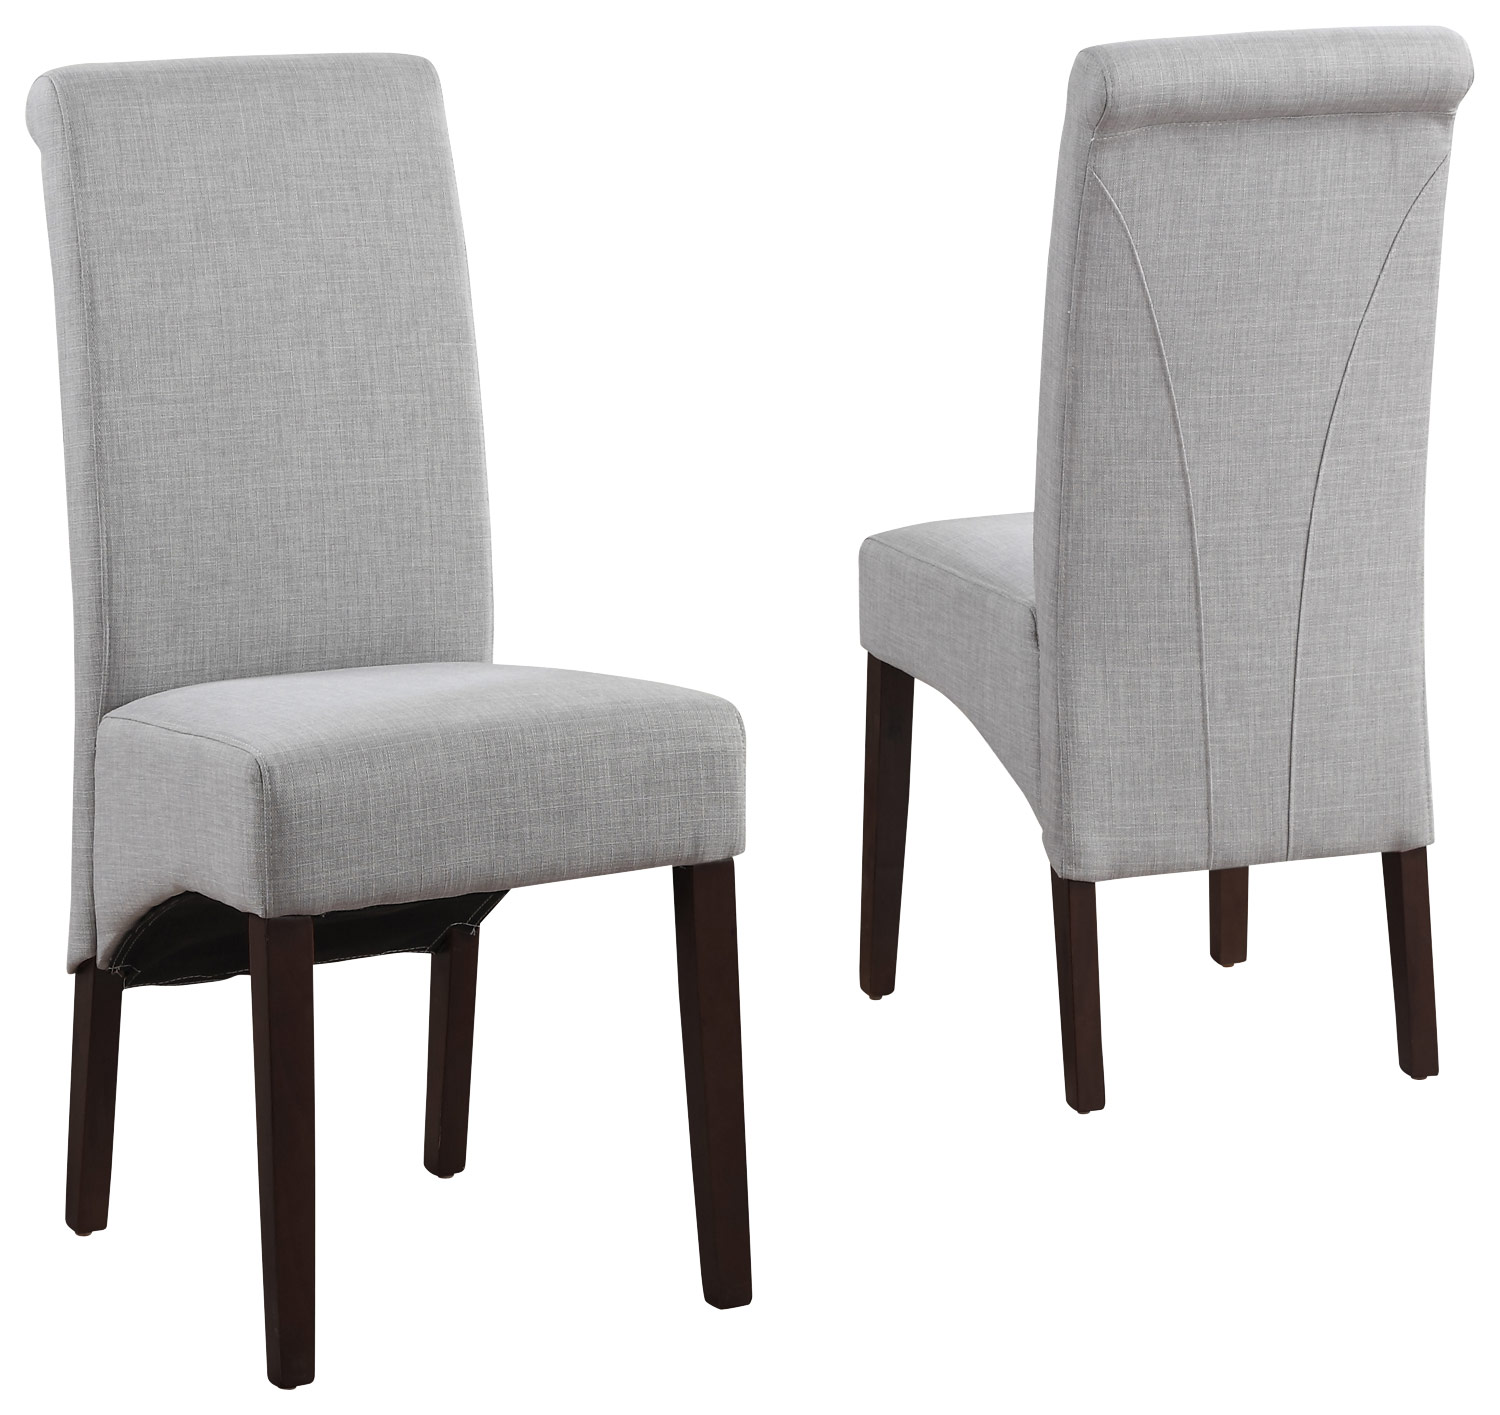 Simpli Home - Avalon Polyester & Wood Dining Chairs (Set of 2) - Dove Gray